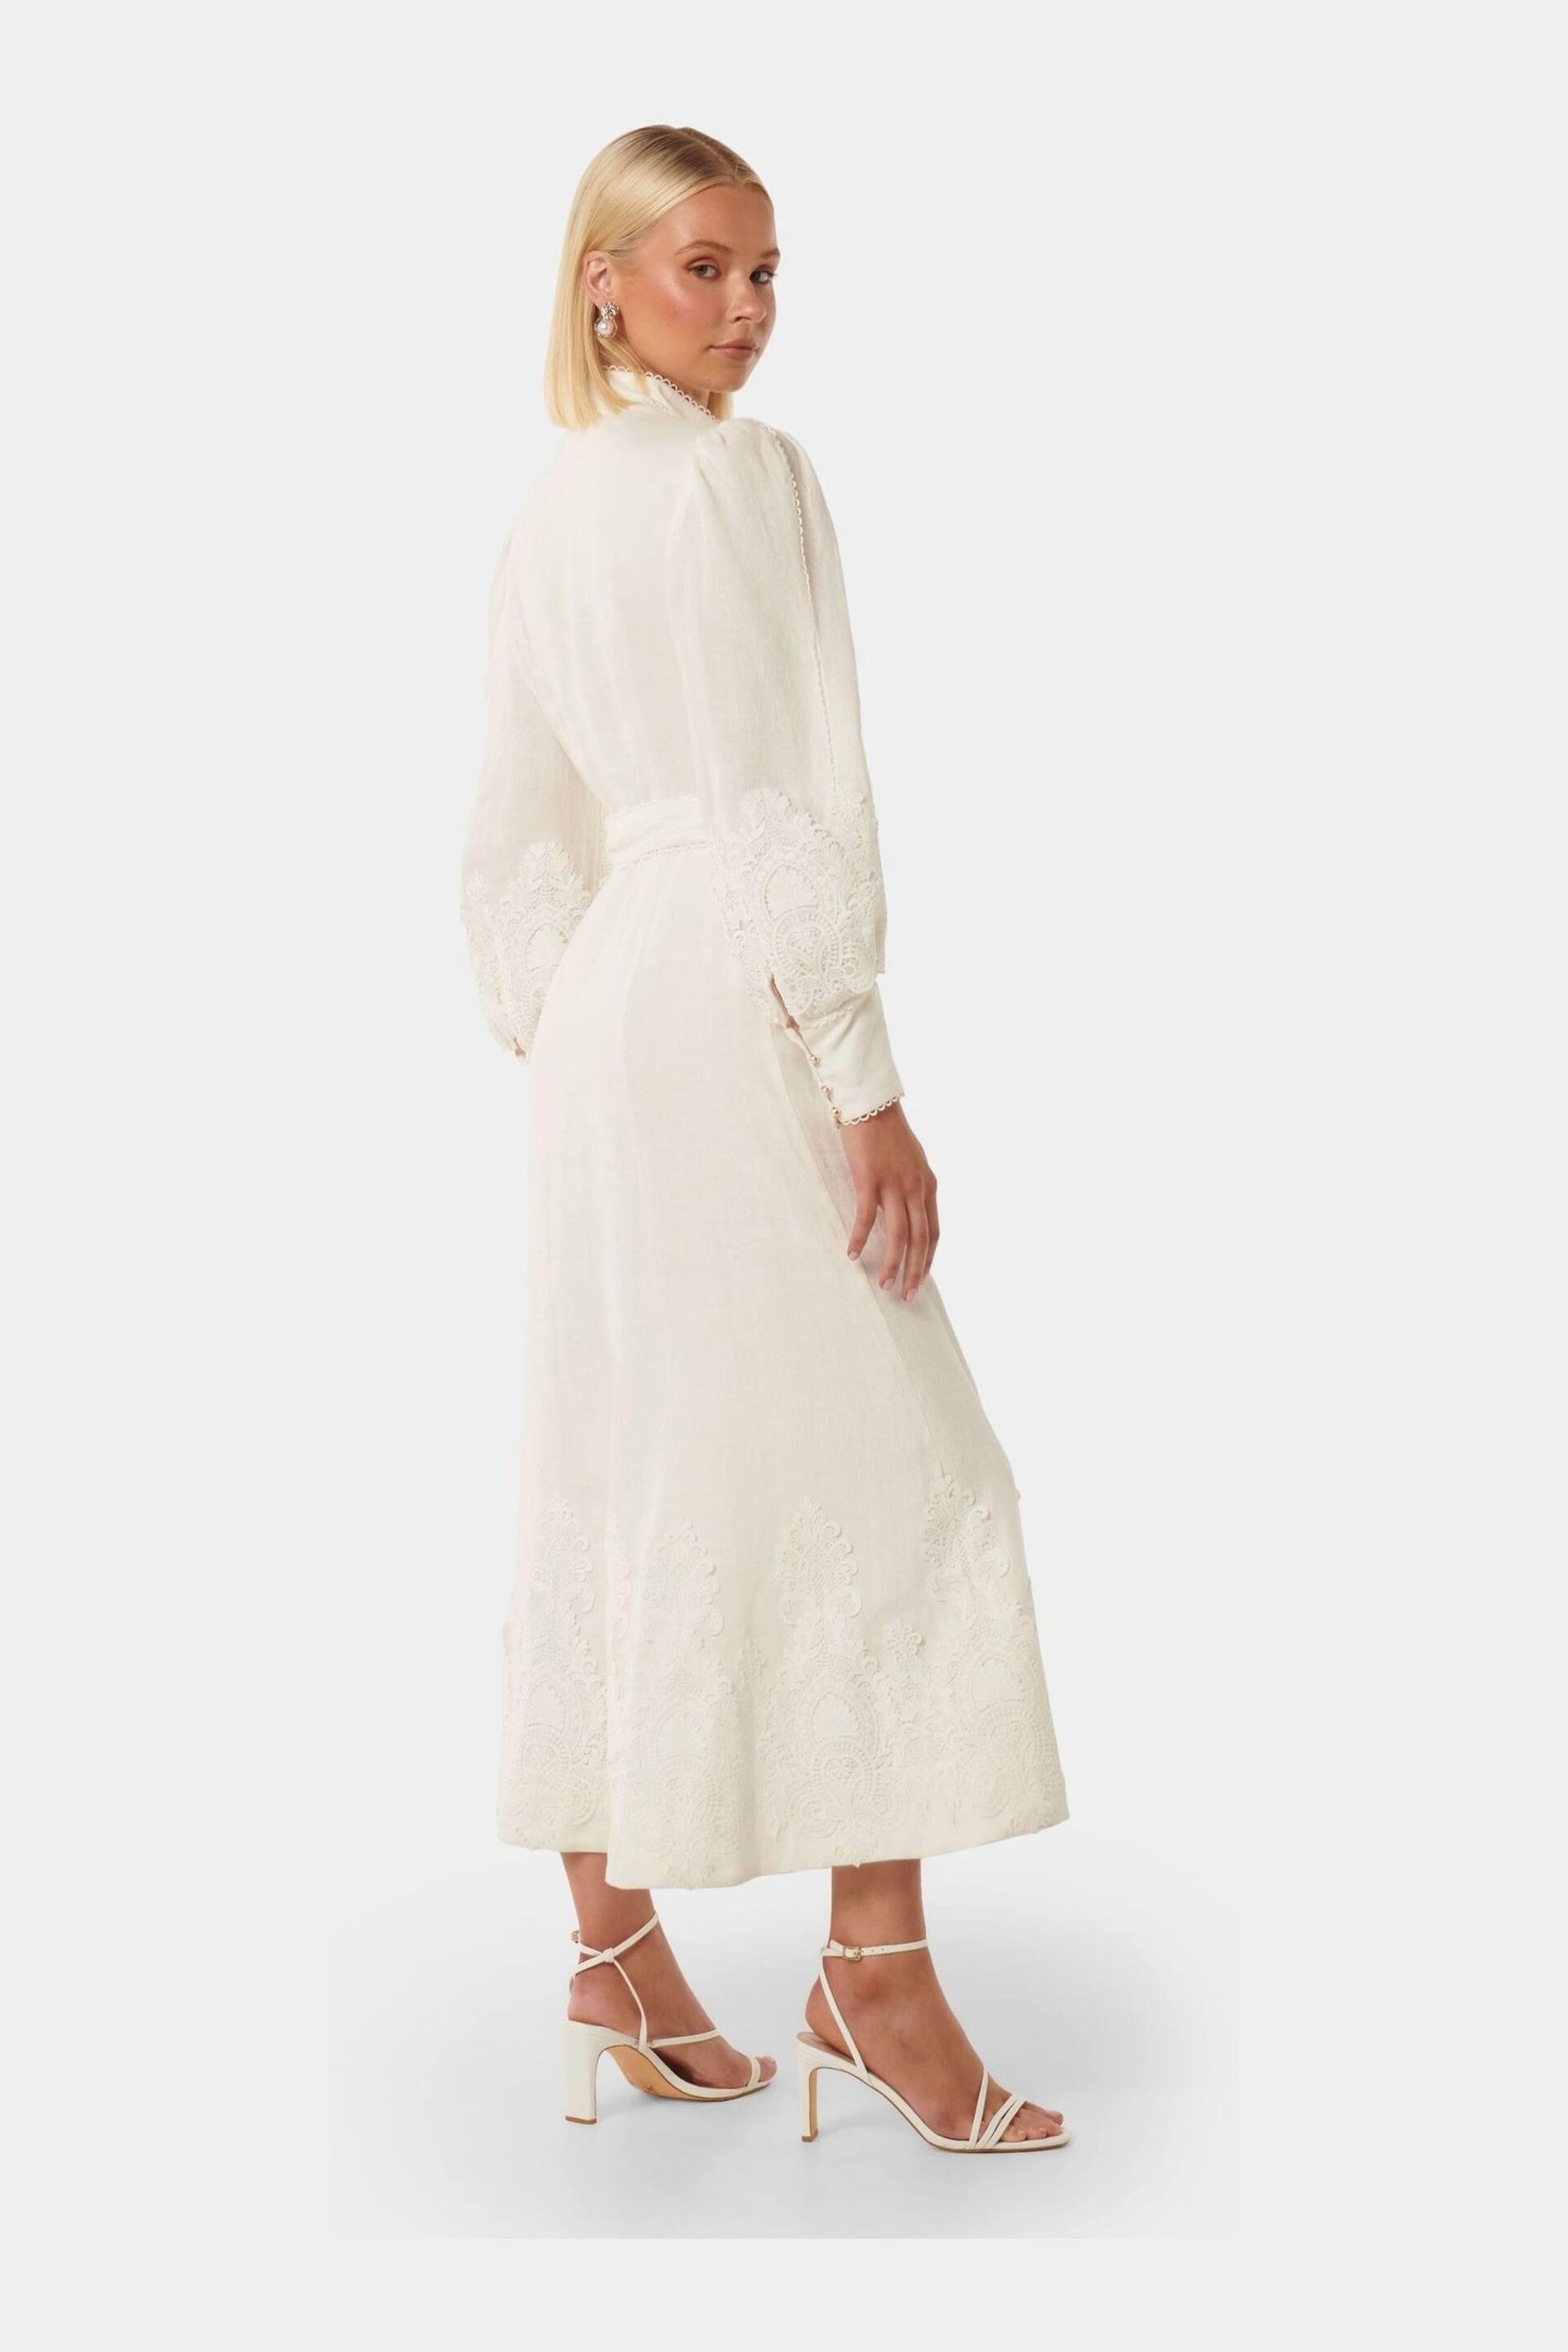 Forever New White Pure Linen Allegra Lace Detail Midi Dress - Image 4 of 4